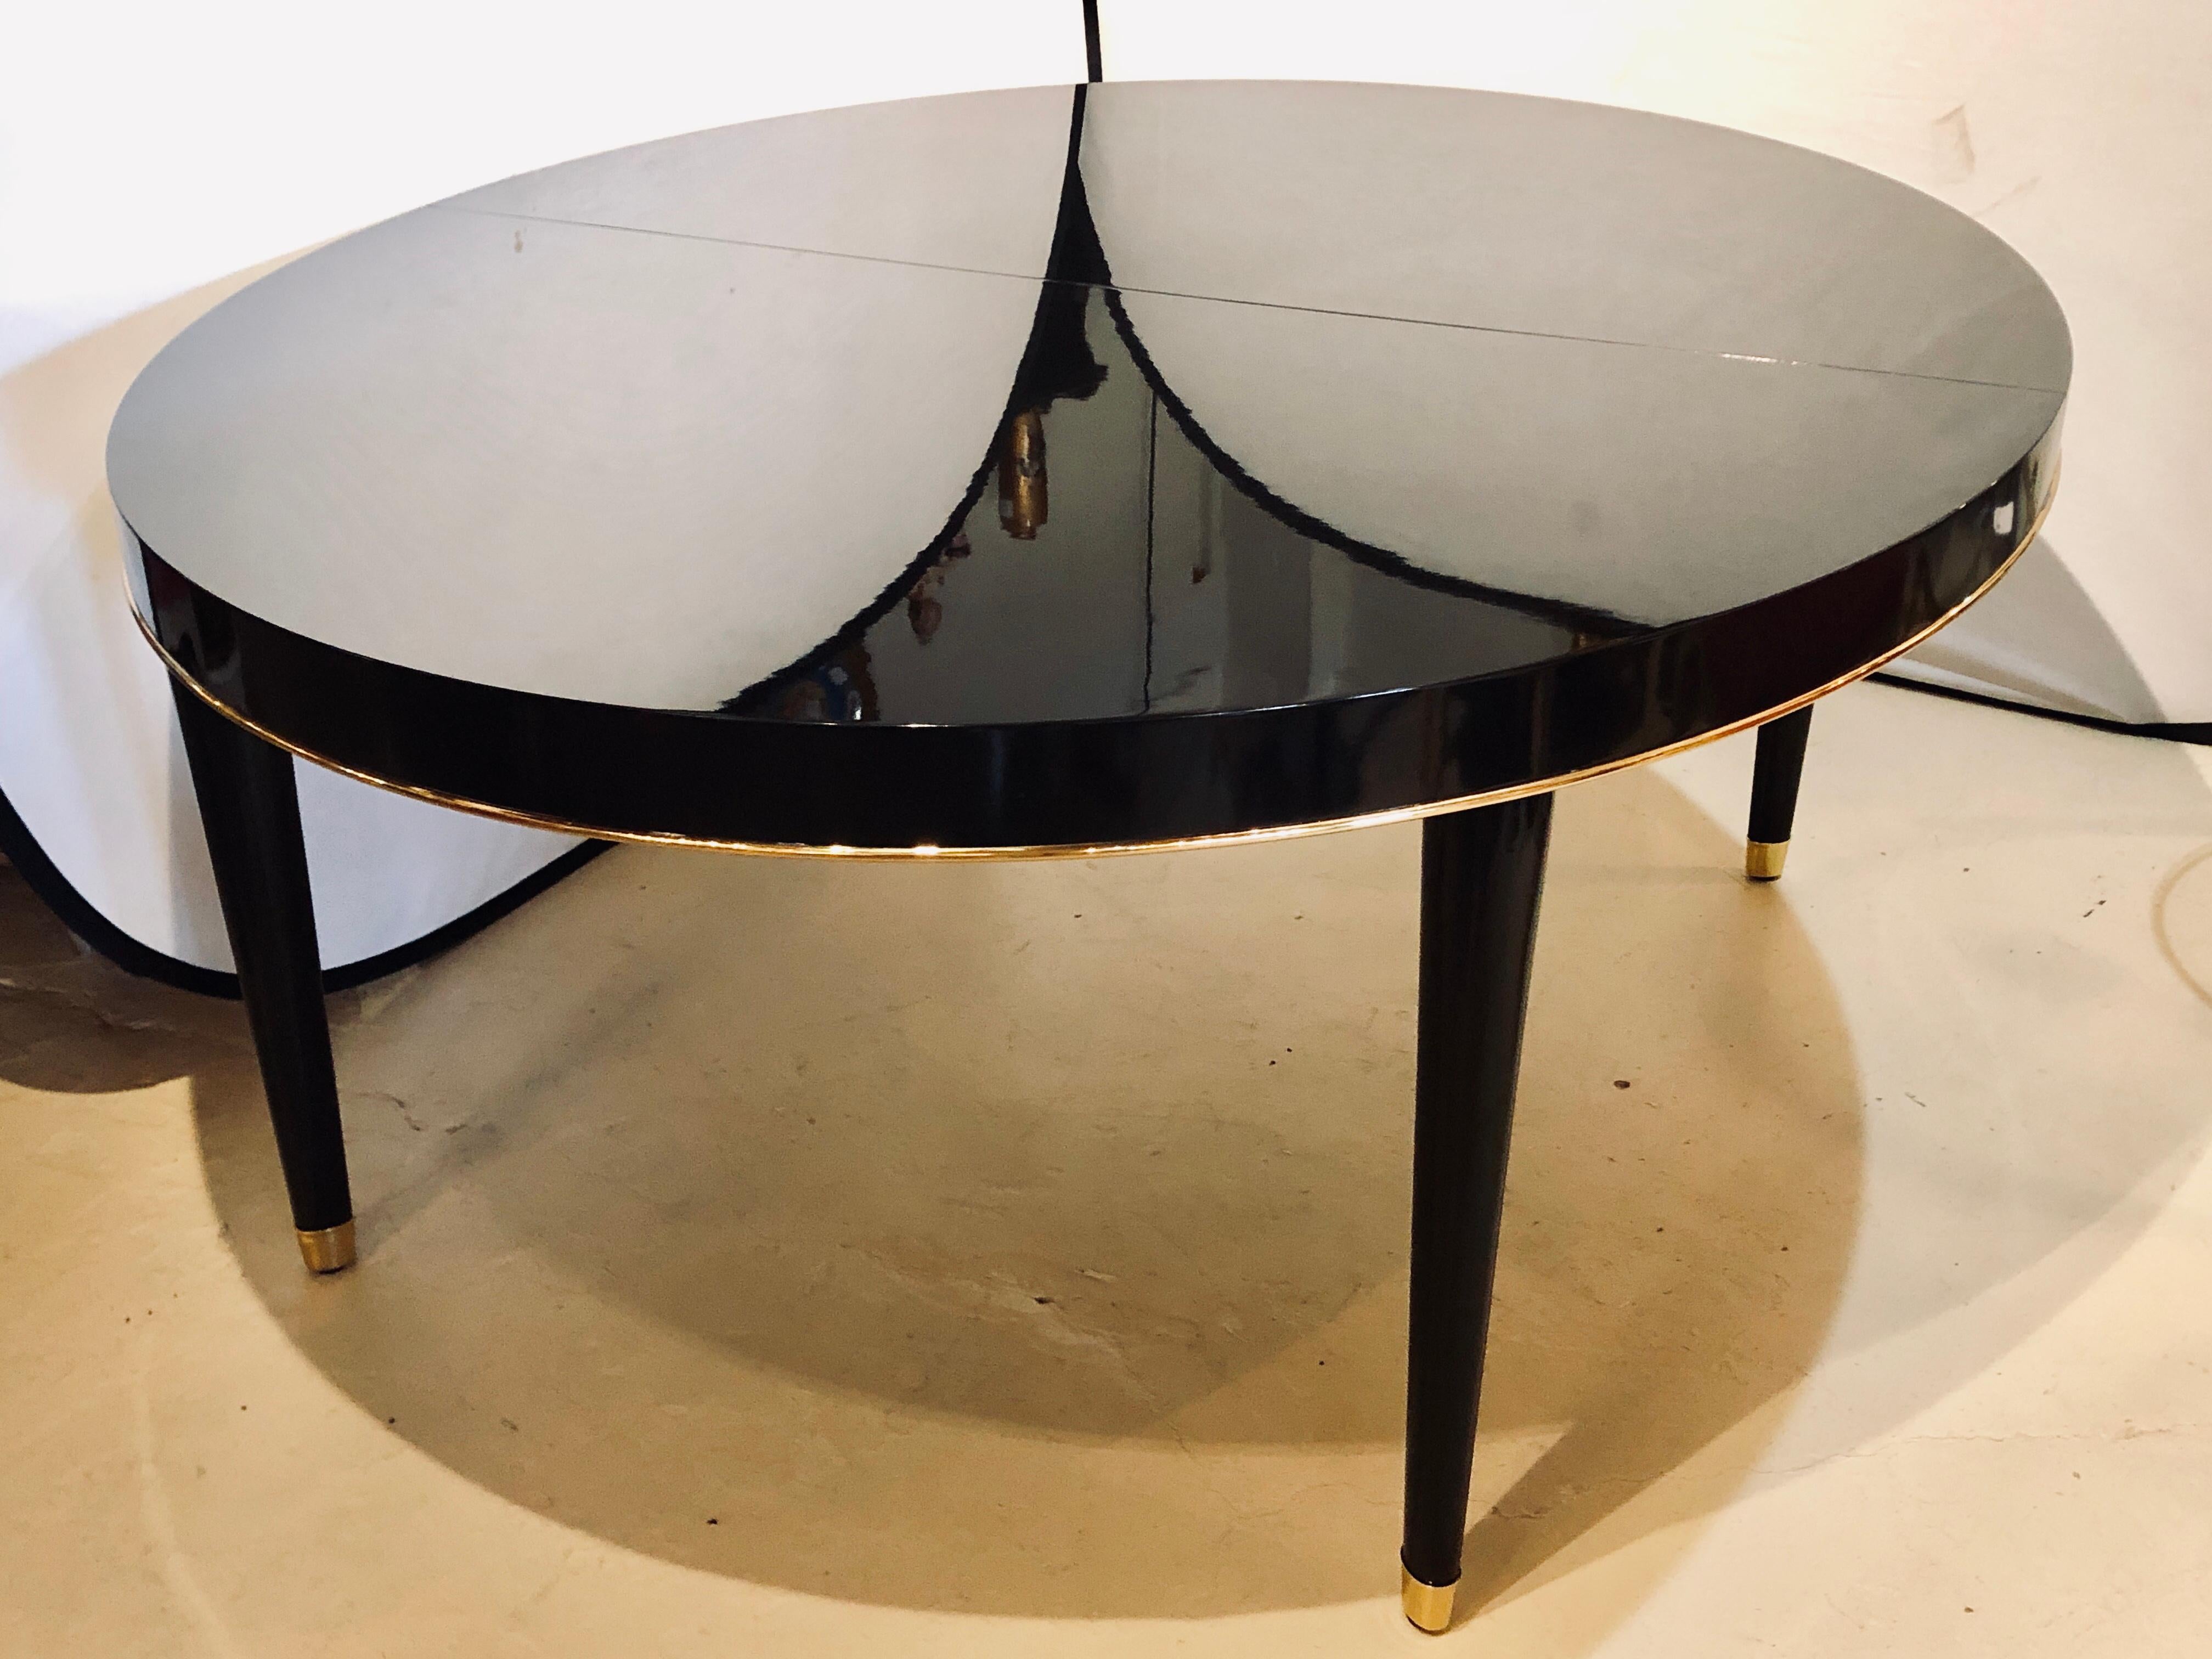 Ralph Lauren Paris one fifth dining room table with one leaf. this fully refinished dining table has an ebony lacquered finish the likes of the finest Steinway piano w outstanding gilt metal trim and sabots. The sleek and stylish lines would make